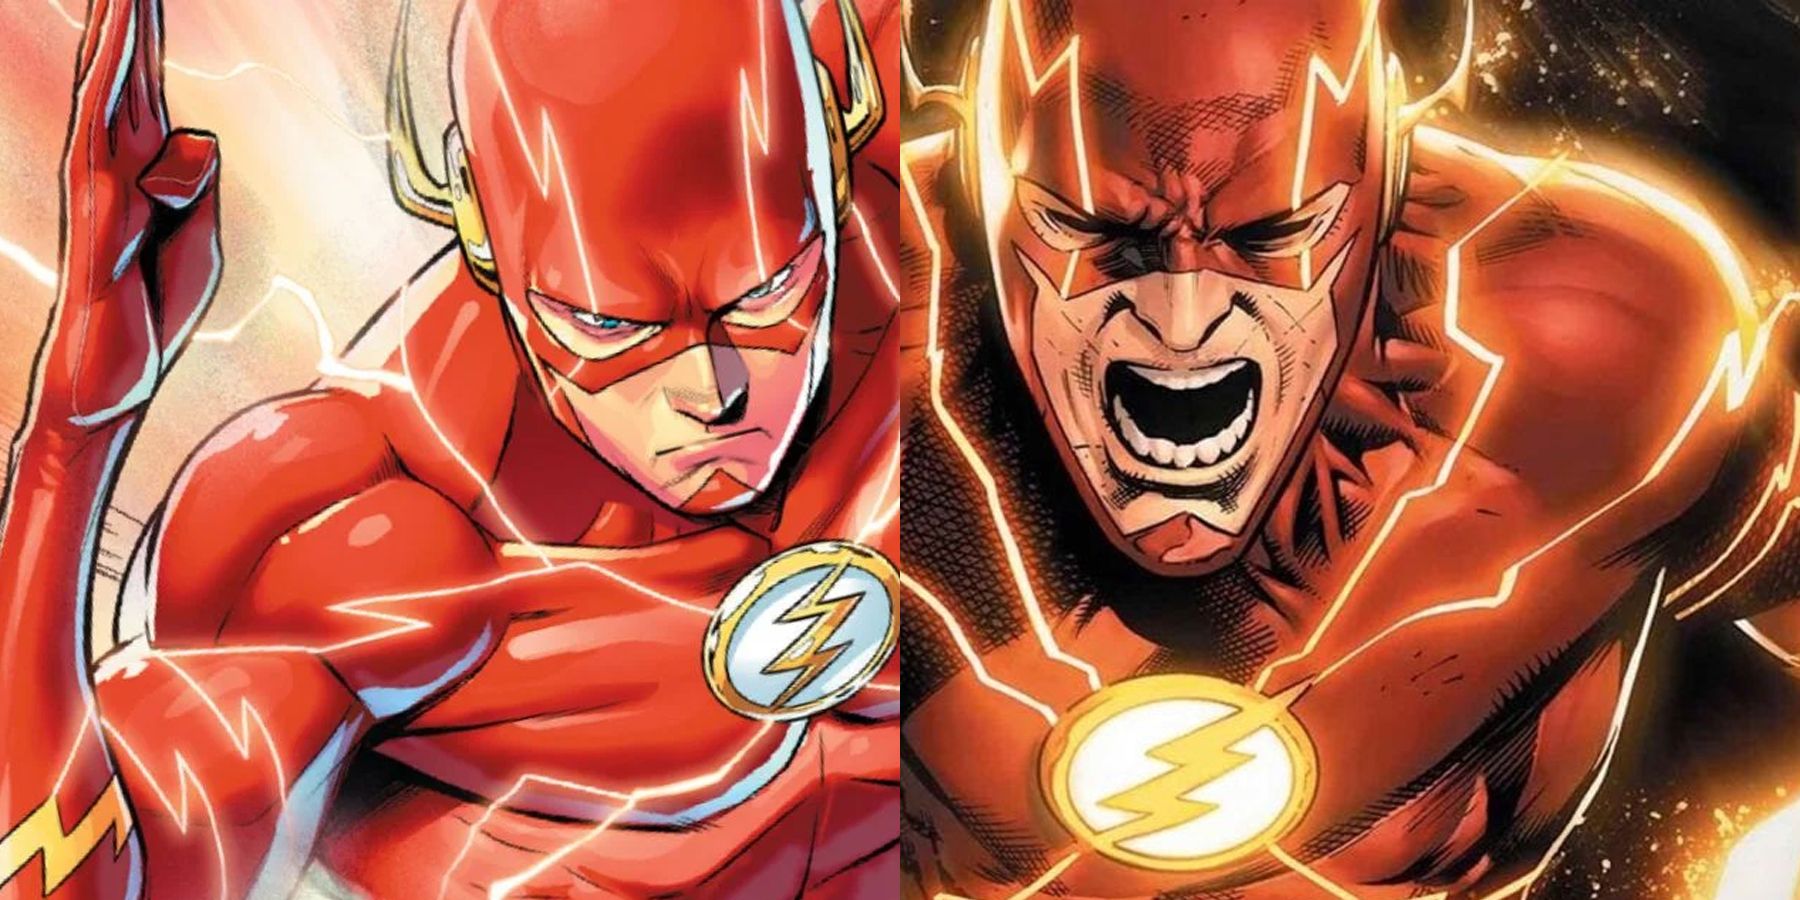 Strange Powers of the Flash In The Comics